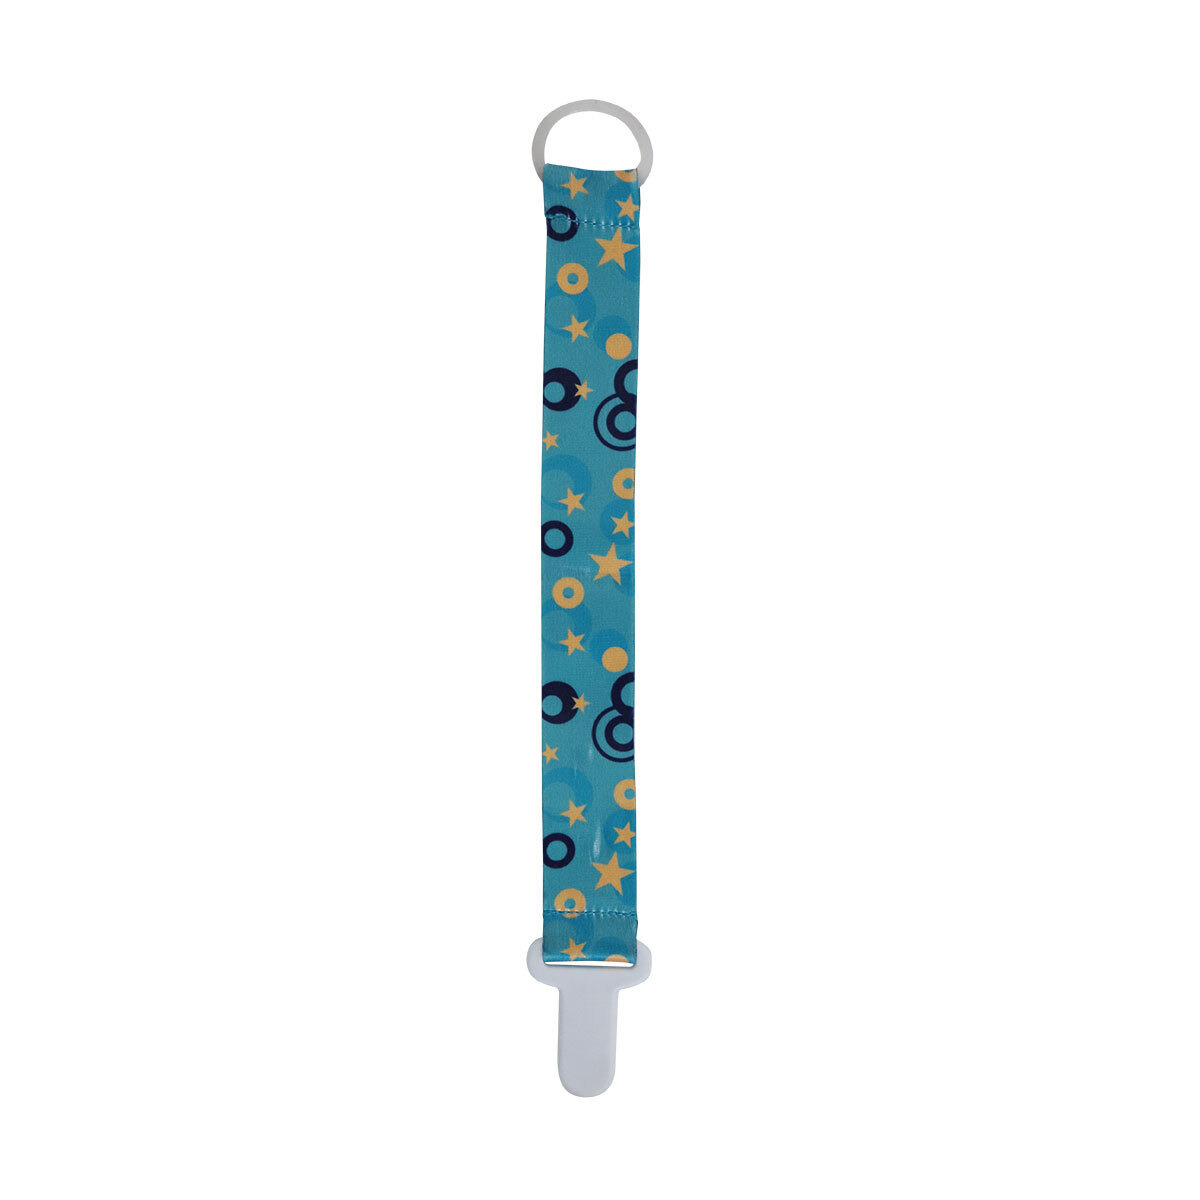 Snuggletime Pacifier Clip - 2 Pack